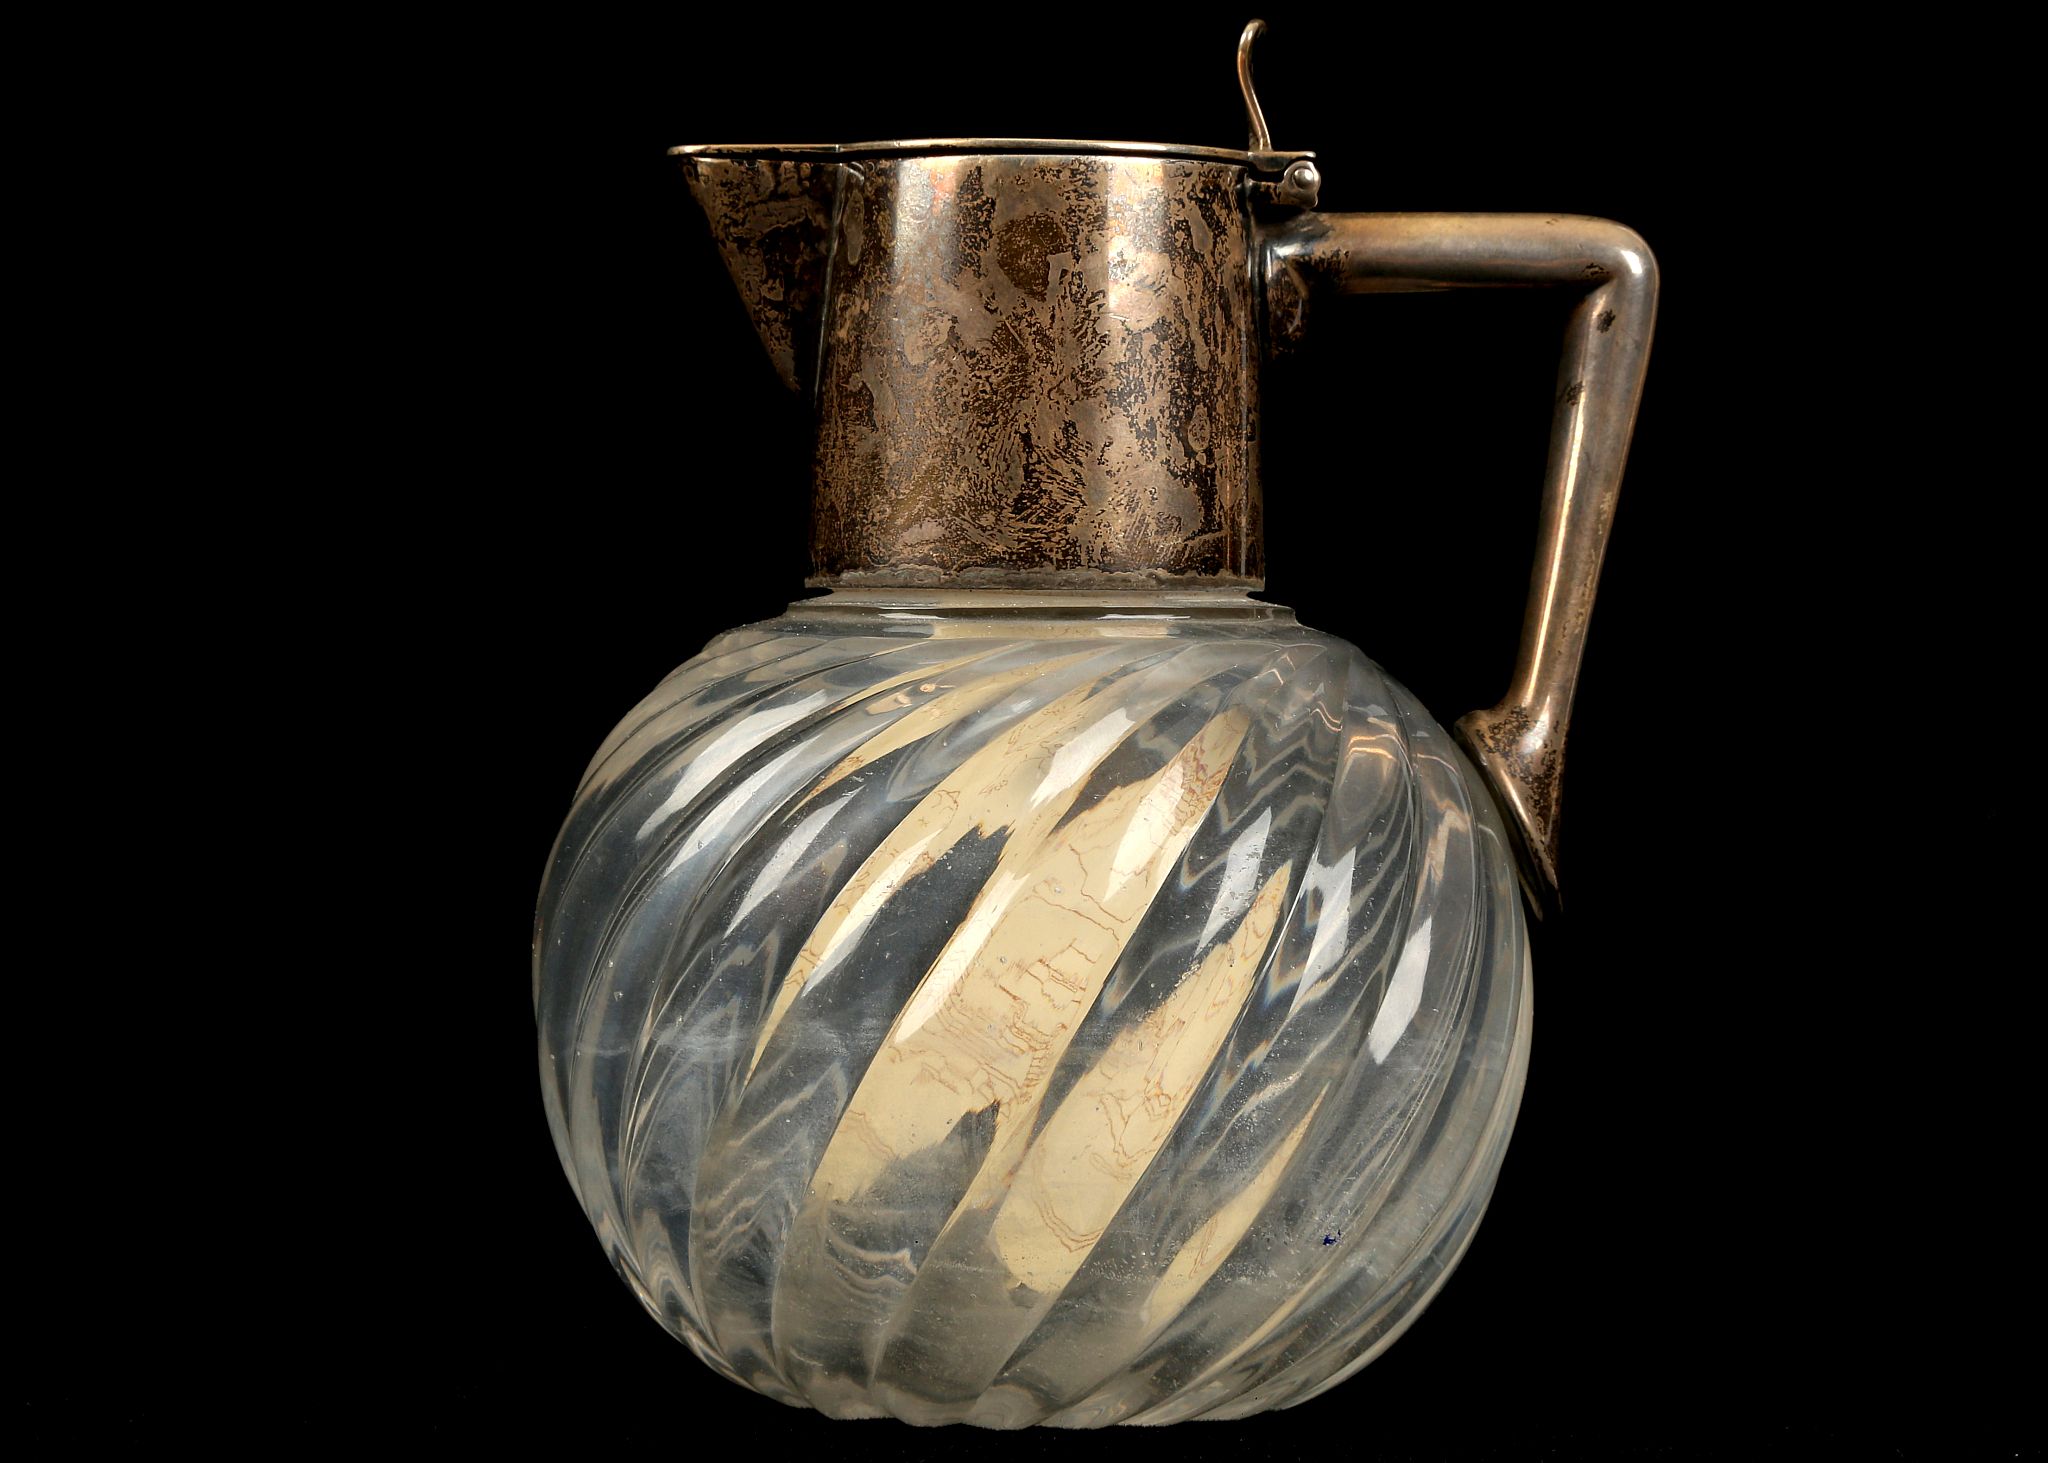 A CONTINENTAL AESTHETIC MOVEMENT CLARET JUG, circa - Image 2 of 10